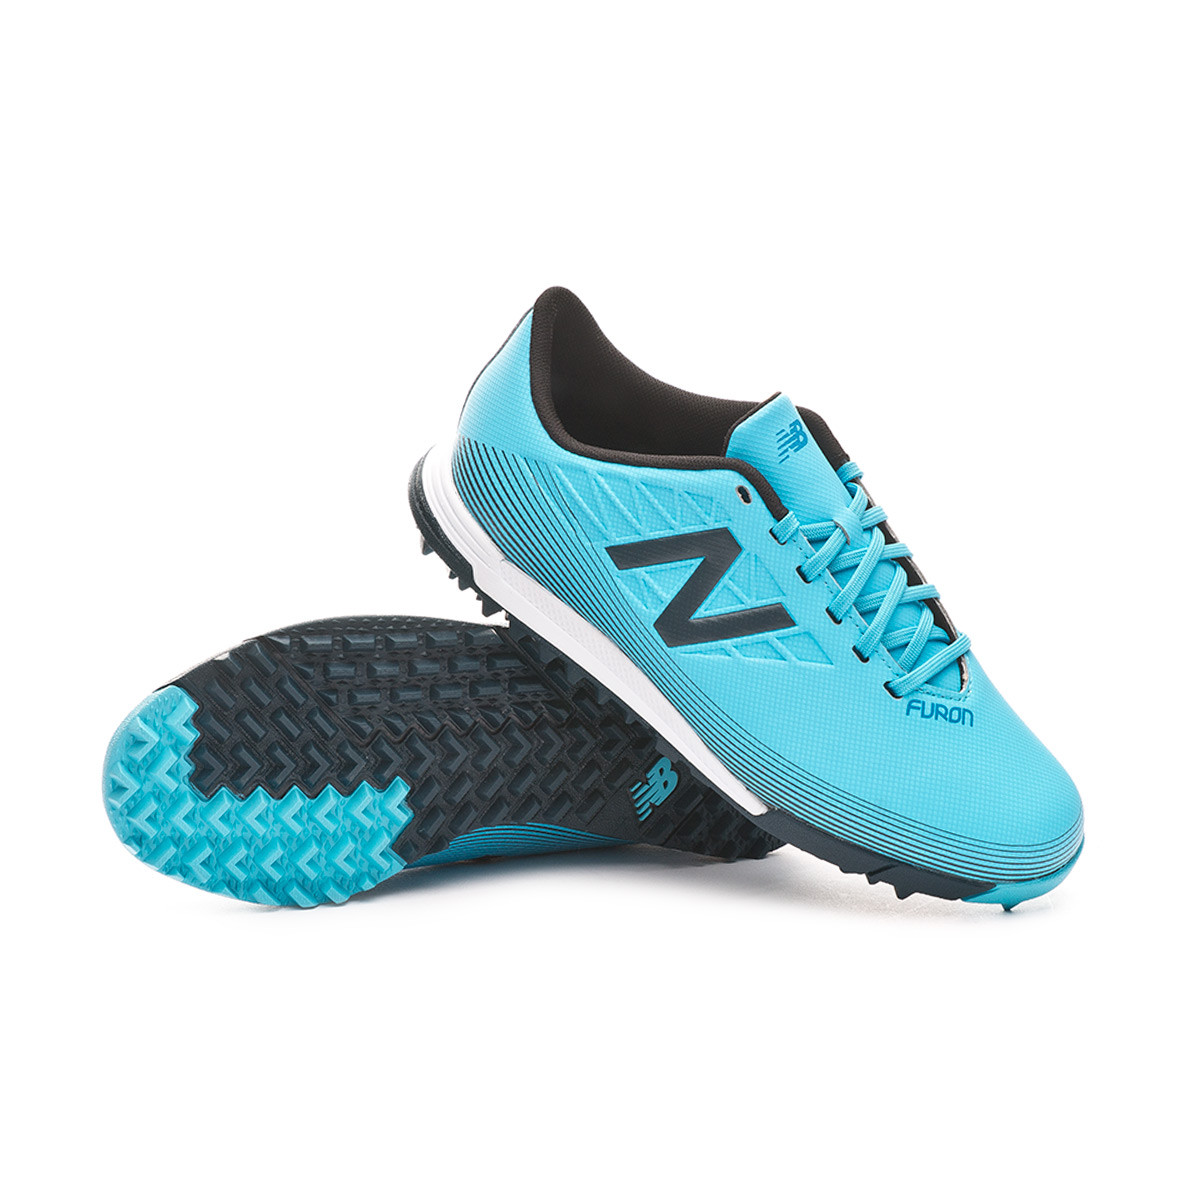 New Balance Furon Turf Online Sale, UP TO 60% OFF